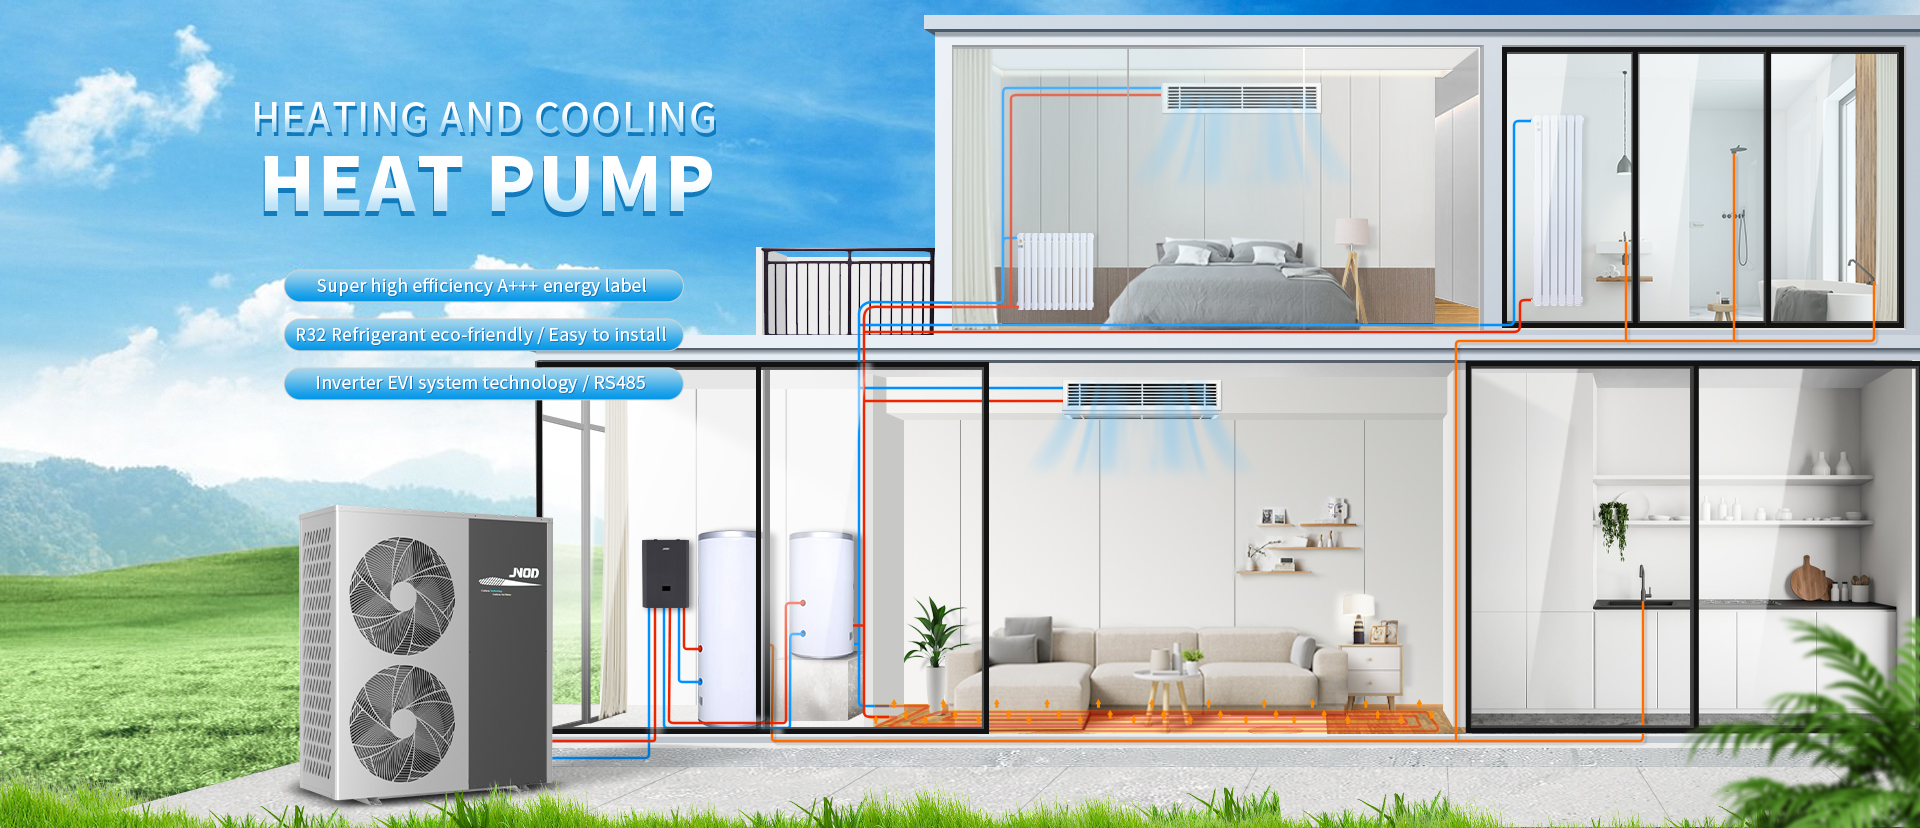 Heating And Cooling Heat Pump direct sales